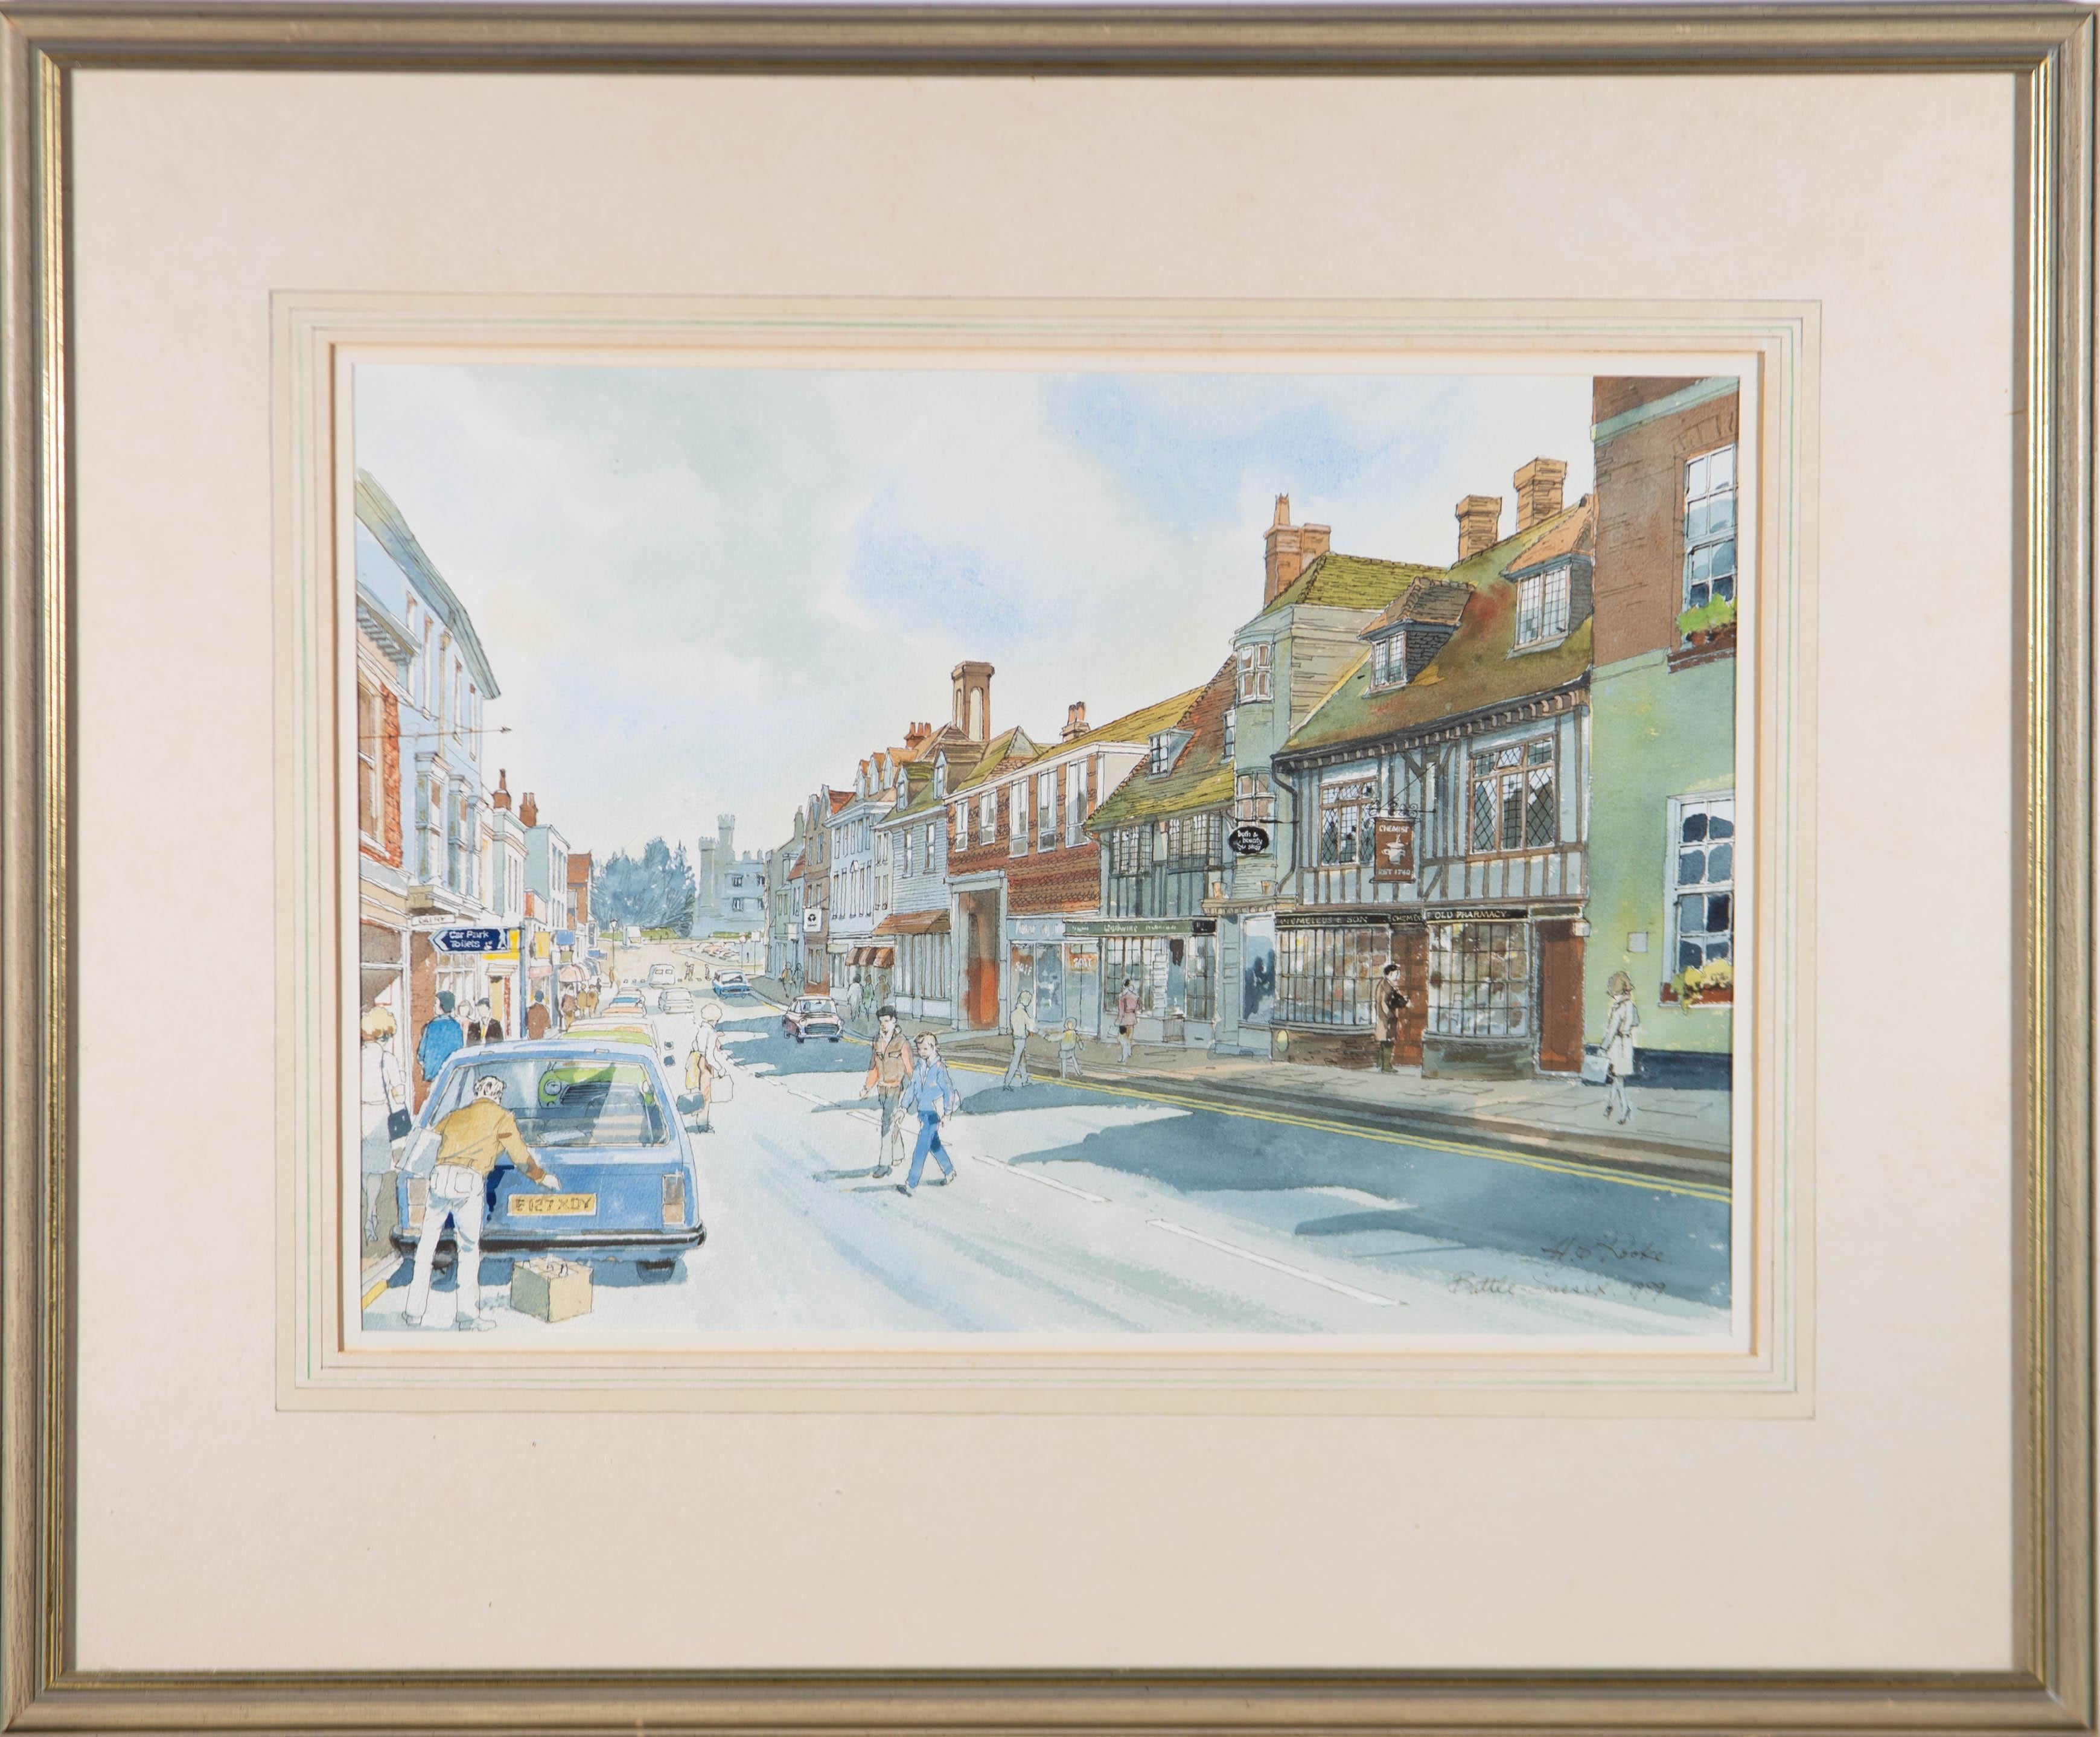 A wonderful original watercolour study by the British artist Chris Rooke, with pen and ink detail. Inscribed with the location to the lower right. Well presented in a double card wash line mount and simple frame. Signed and dated. On watercolour